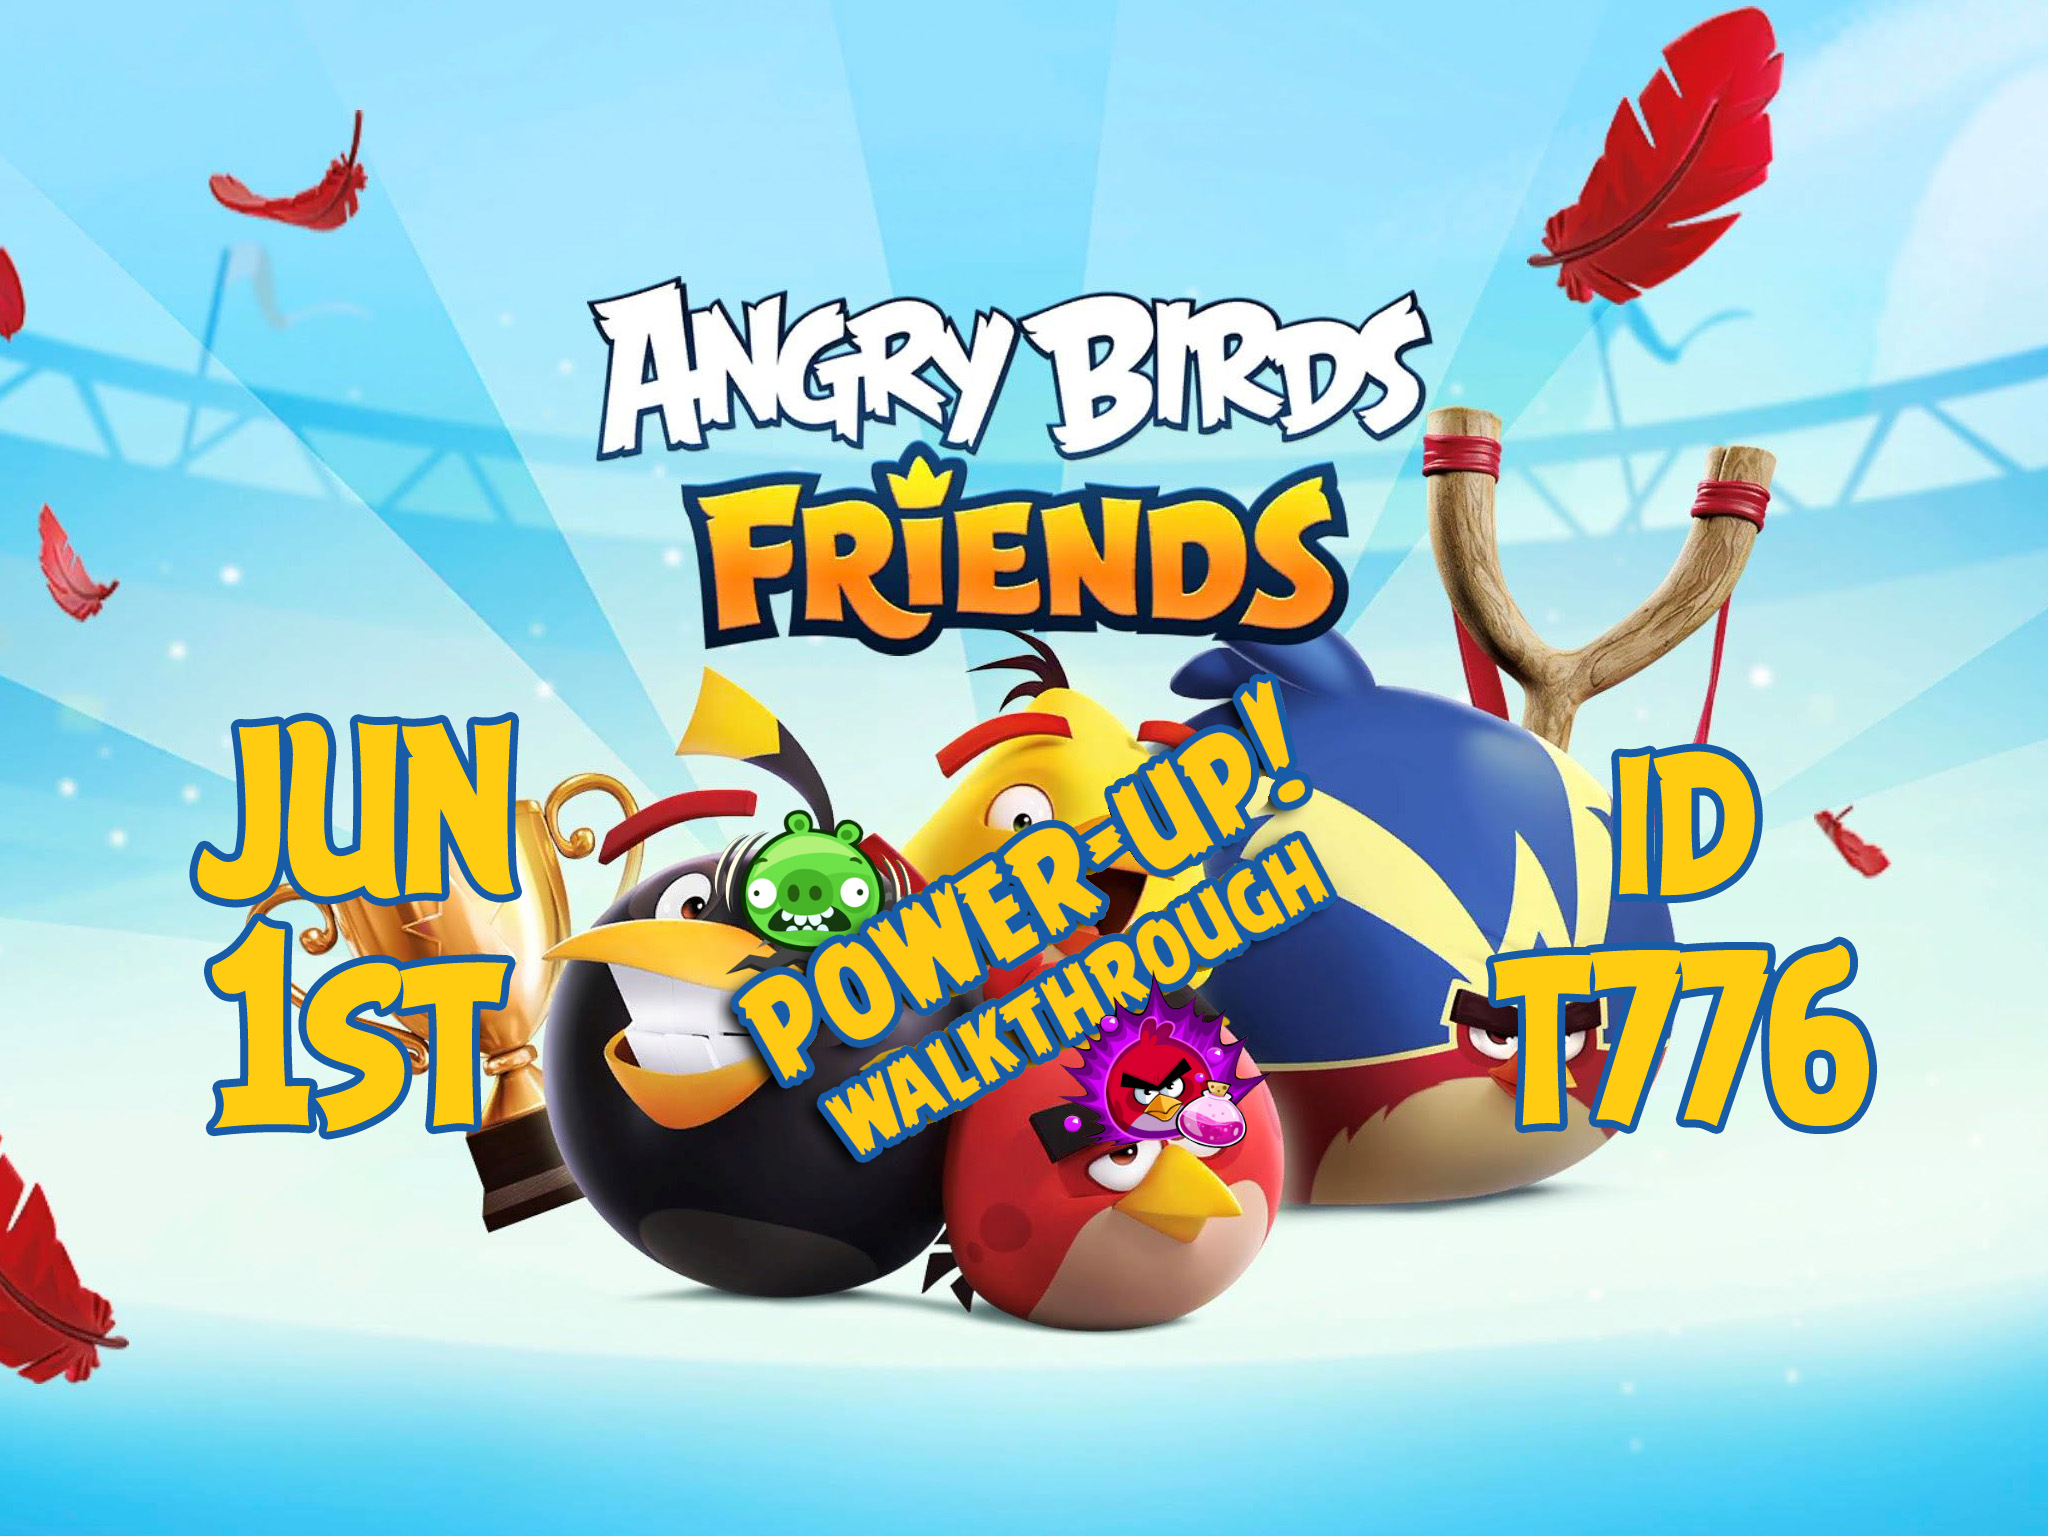 Angry-Birds-Friends-Tournament-T776-Feature-Image-PU